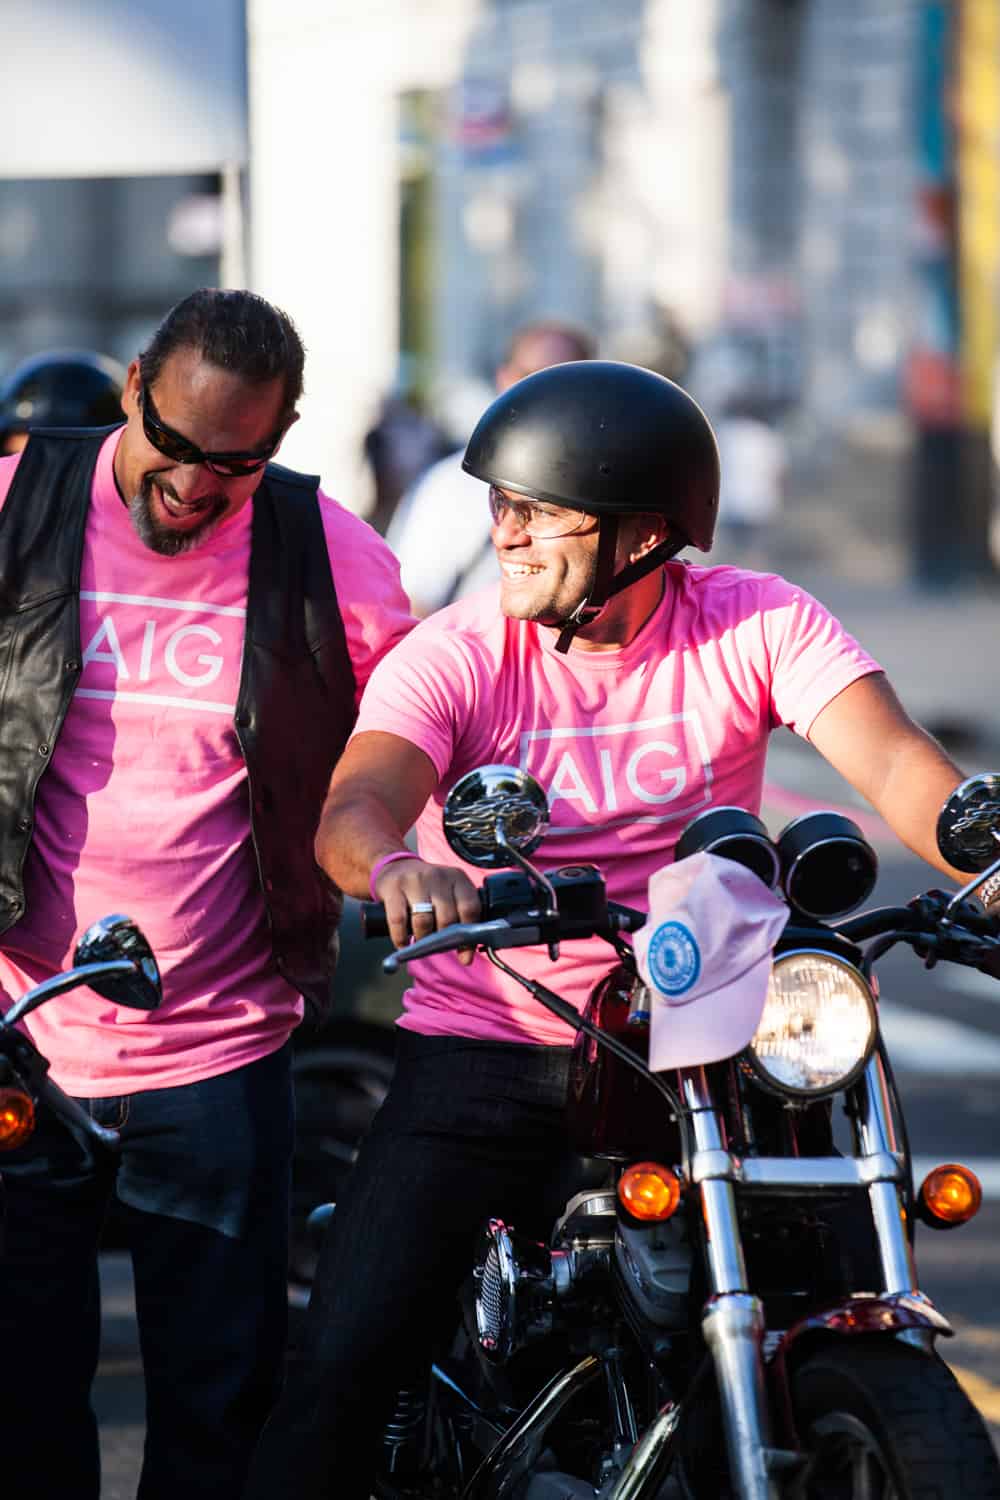 NYC Race for the Cure photos of man on motorcycle with helmet laughing with another anotherman